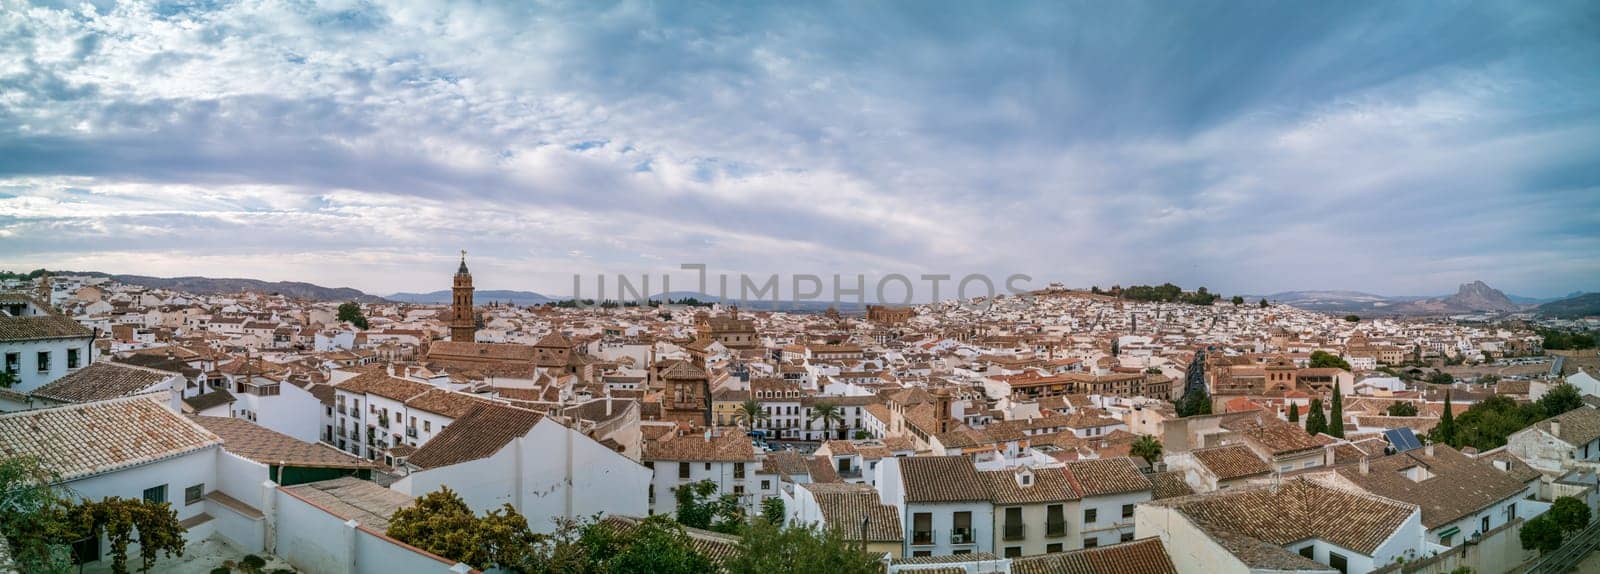 Stunning Aerial View of the Andalusian City of Antequera at Sunset by FerradalFCG